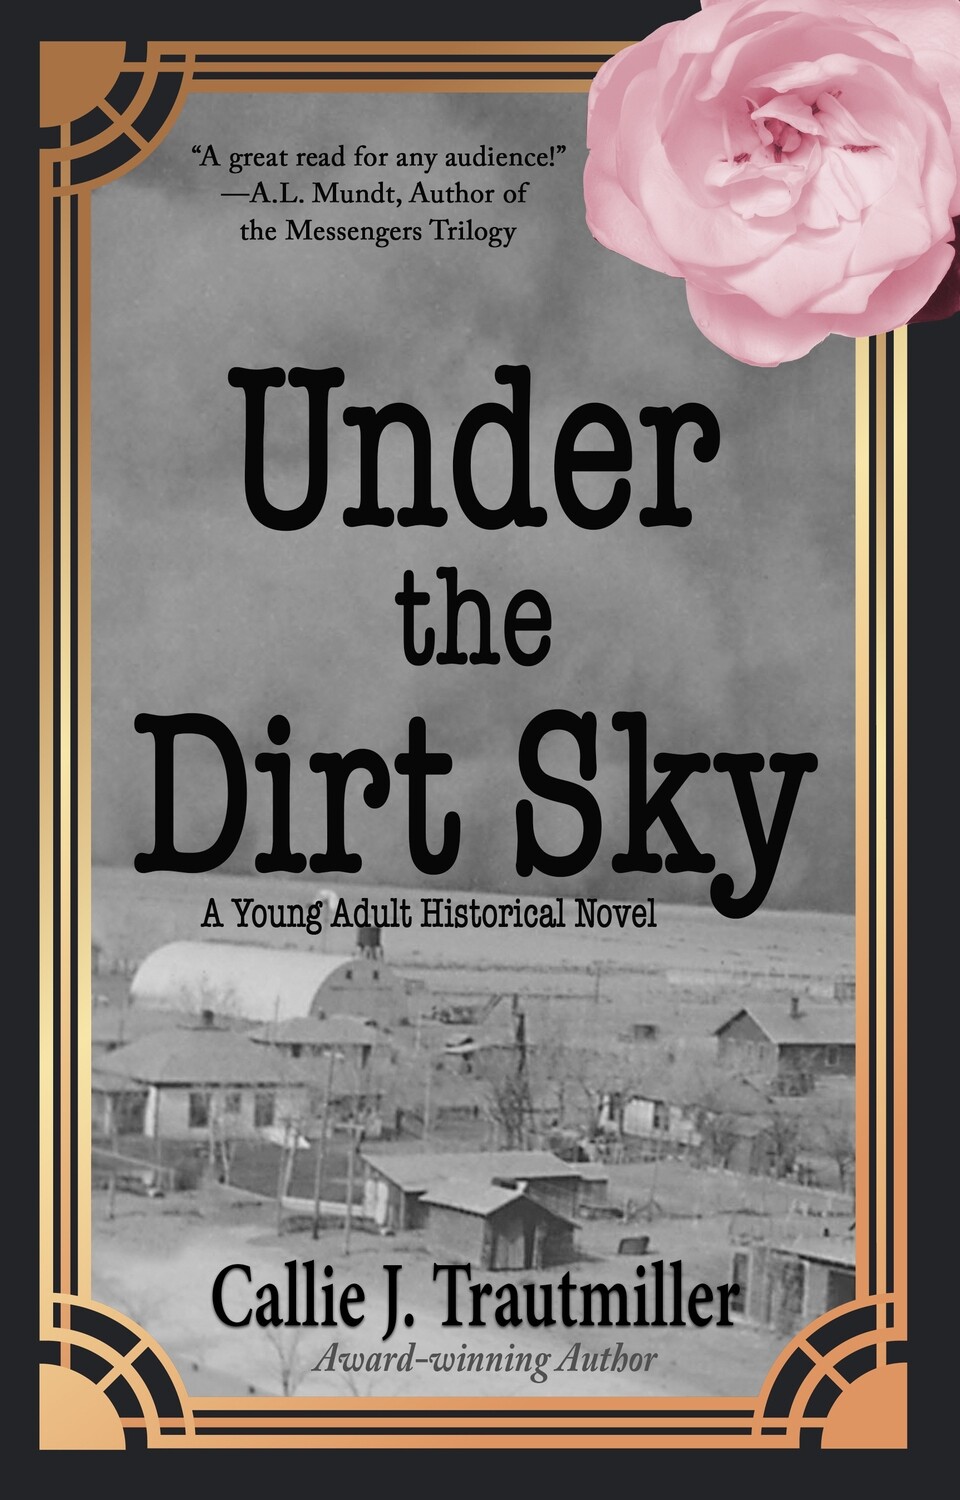 Under the Dirt Sky by Callie J. Trautmiller